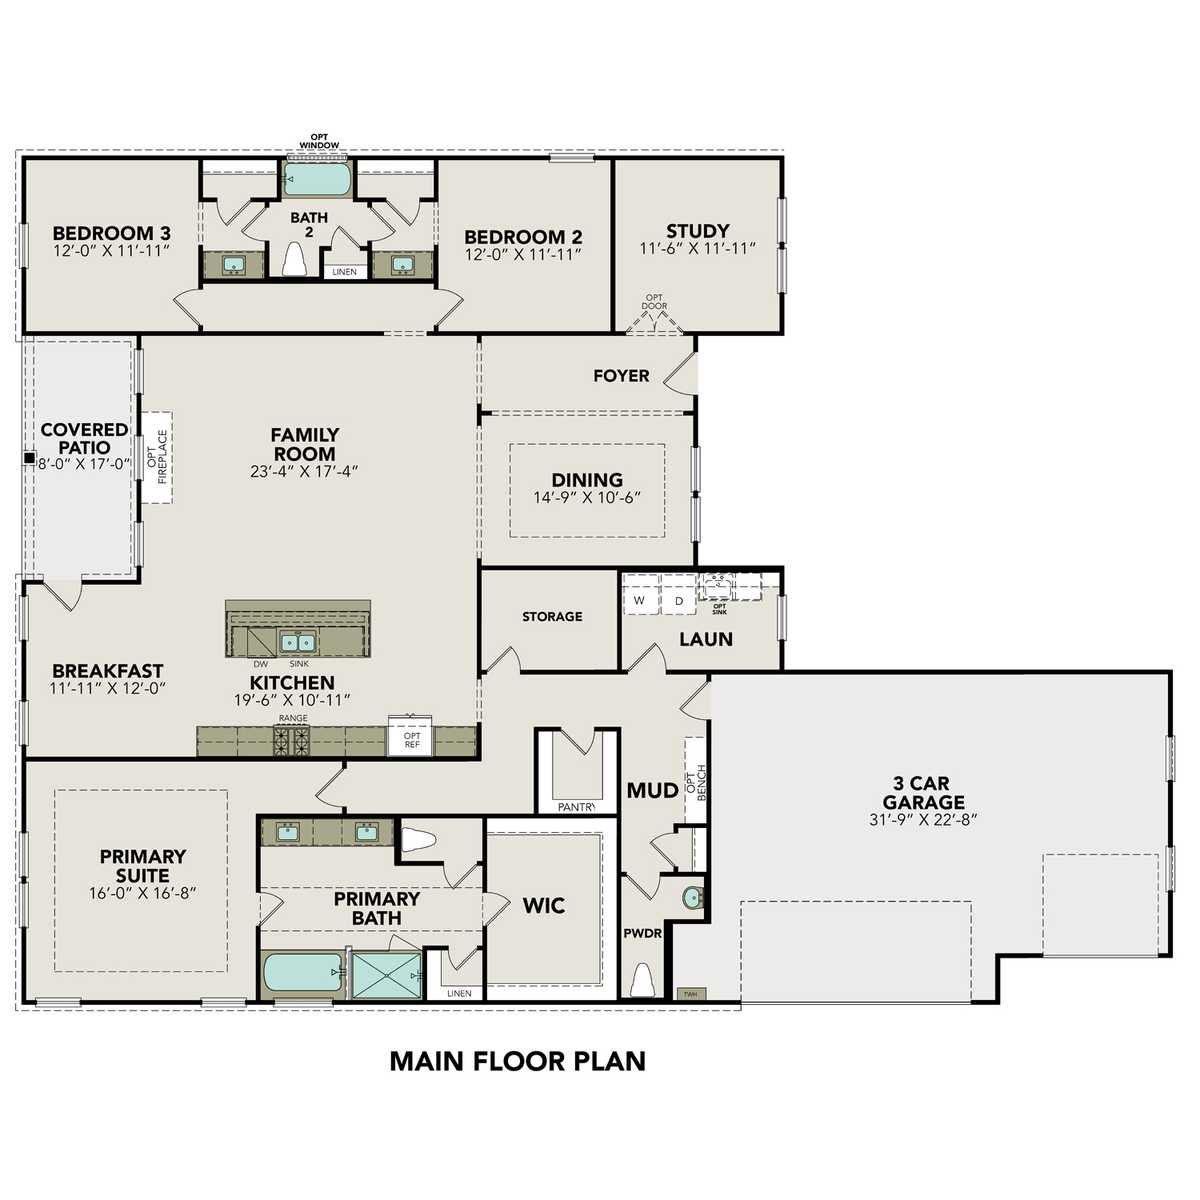 1 - The Foster C floor plan layout for 180 Matthew Path in Davidson Homes' Potranco Oaks community.